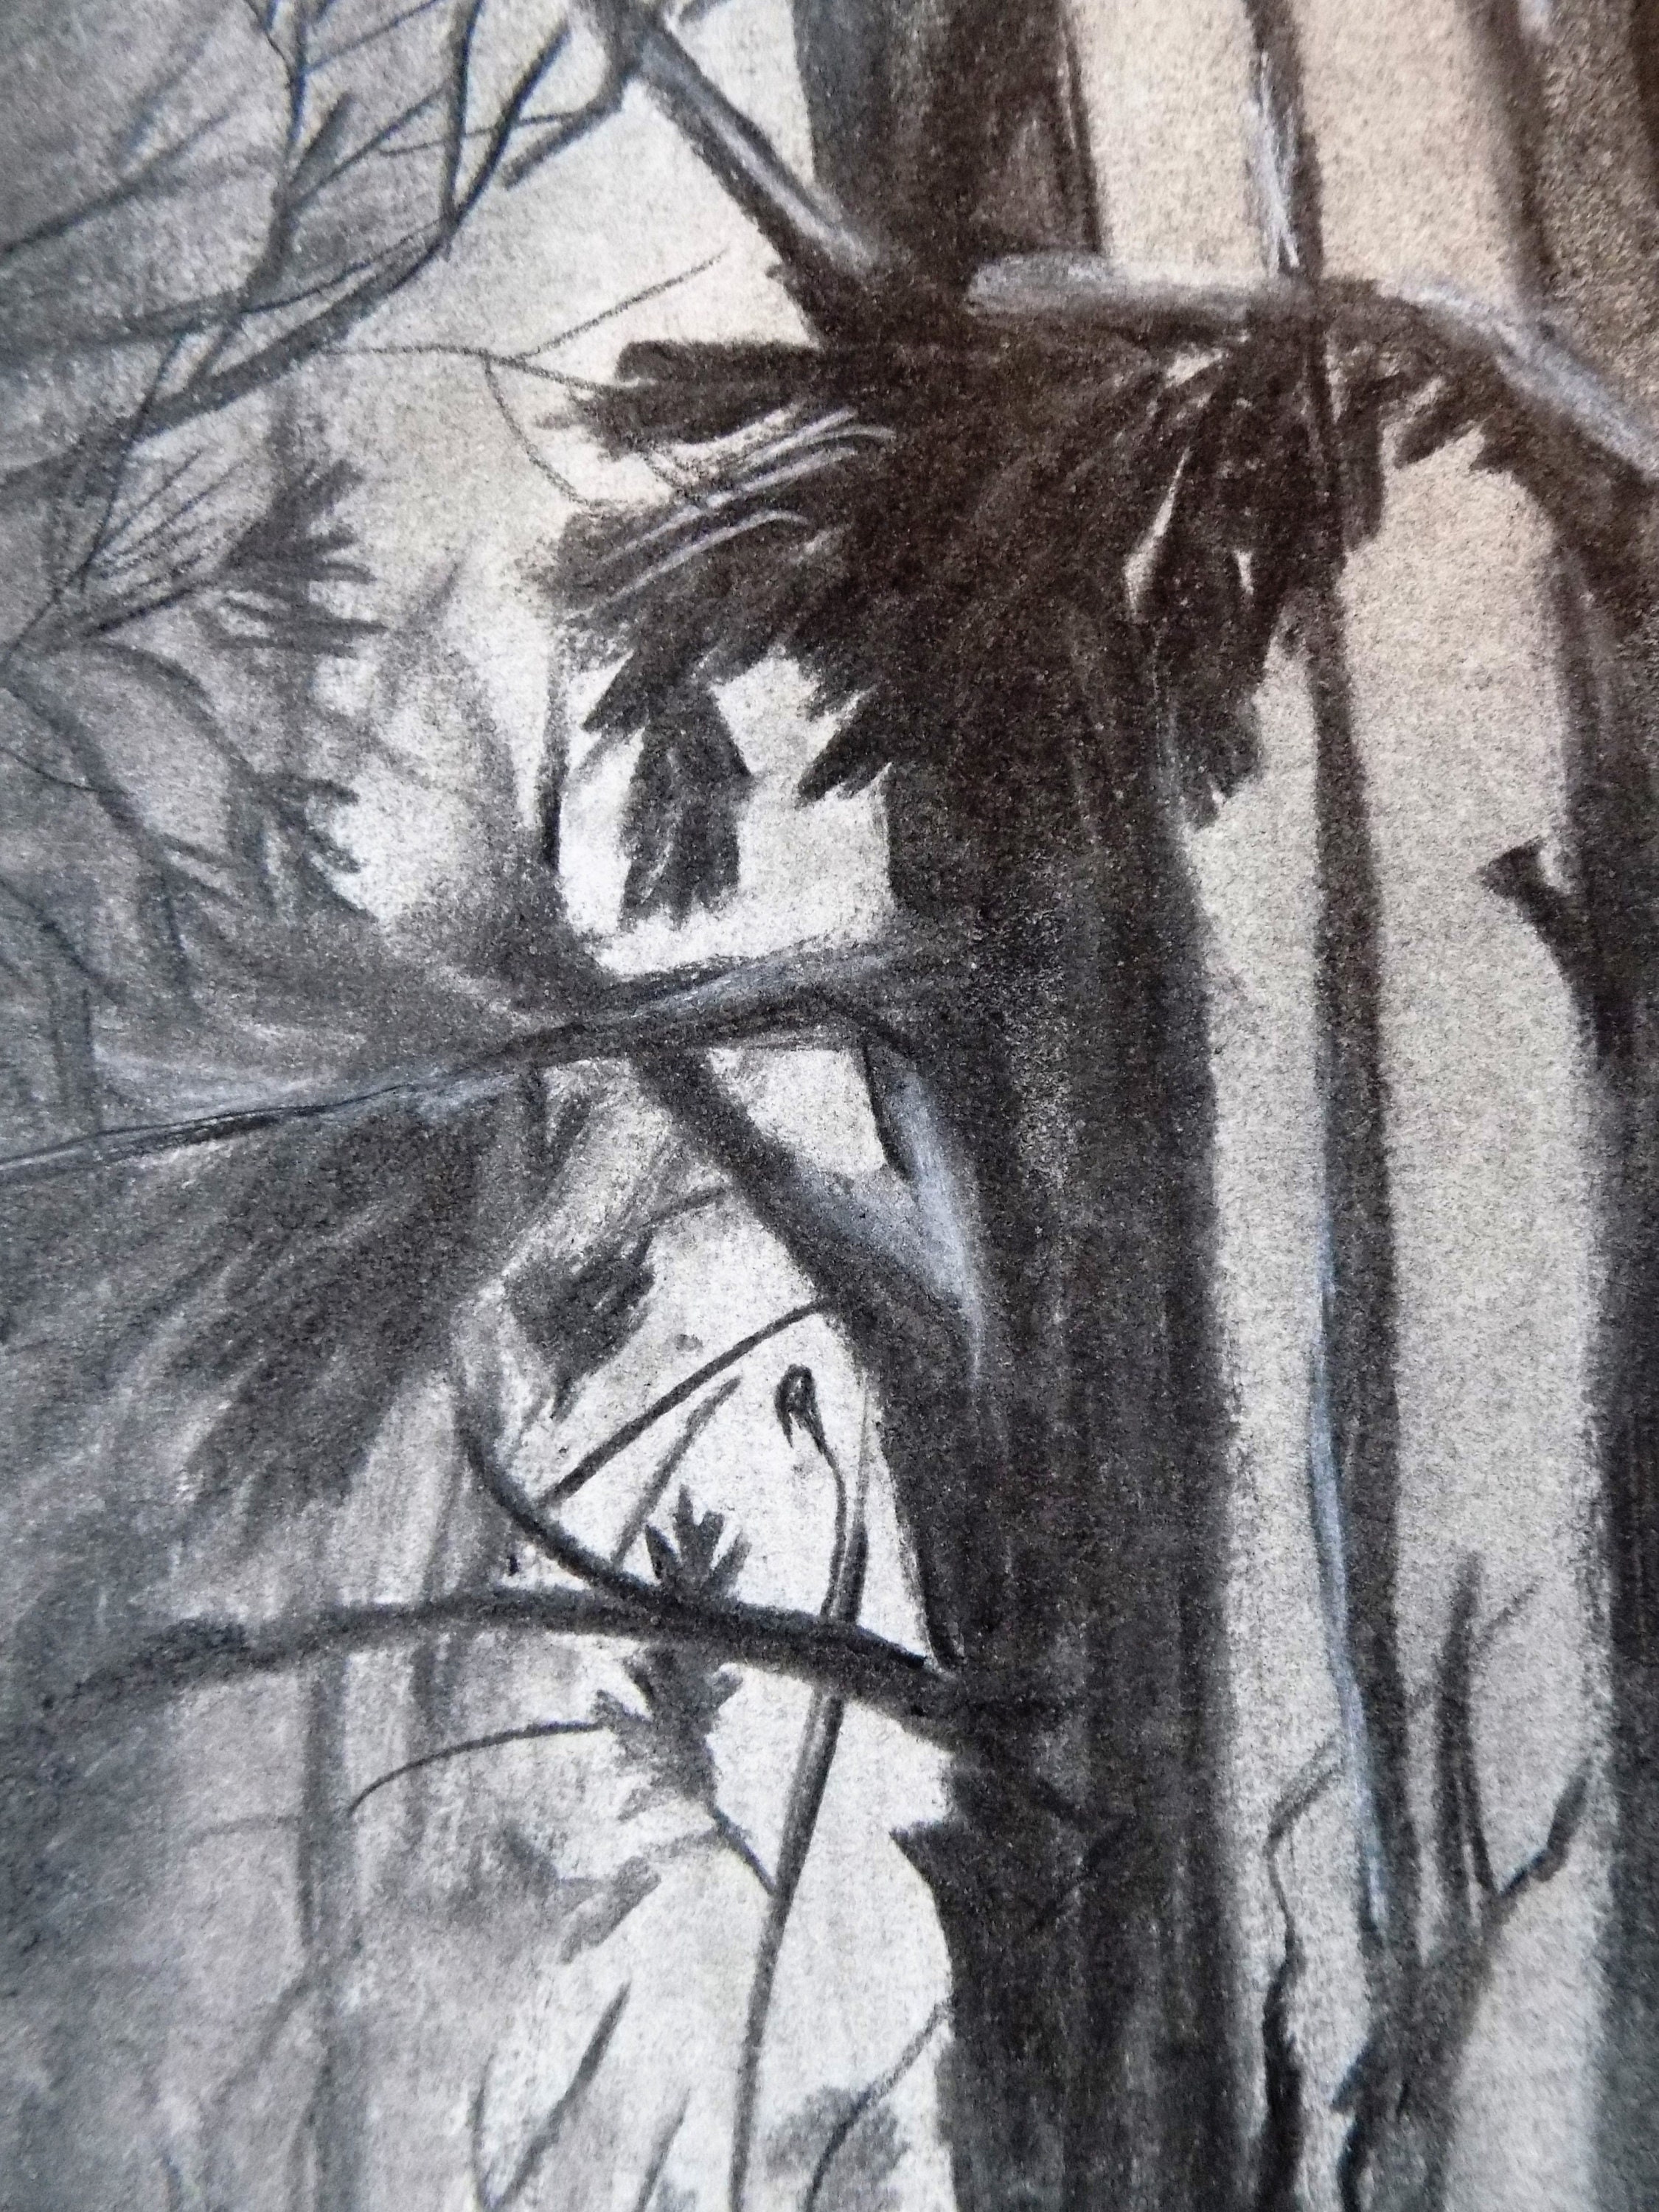 Fall Tree Painting Landscape Original Charcoal Art 14 by 11 inches – Alice Wood  Art